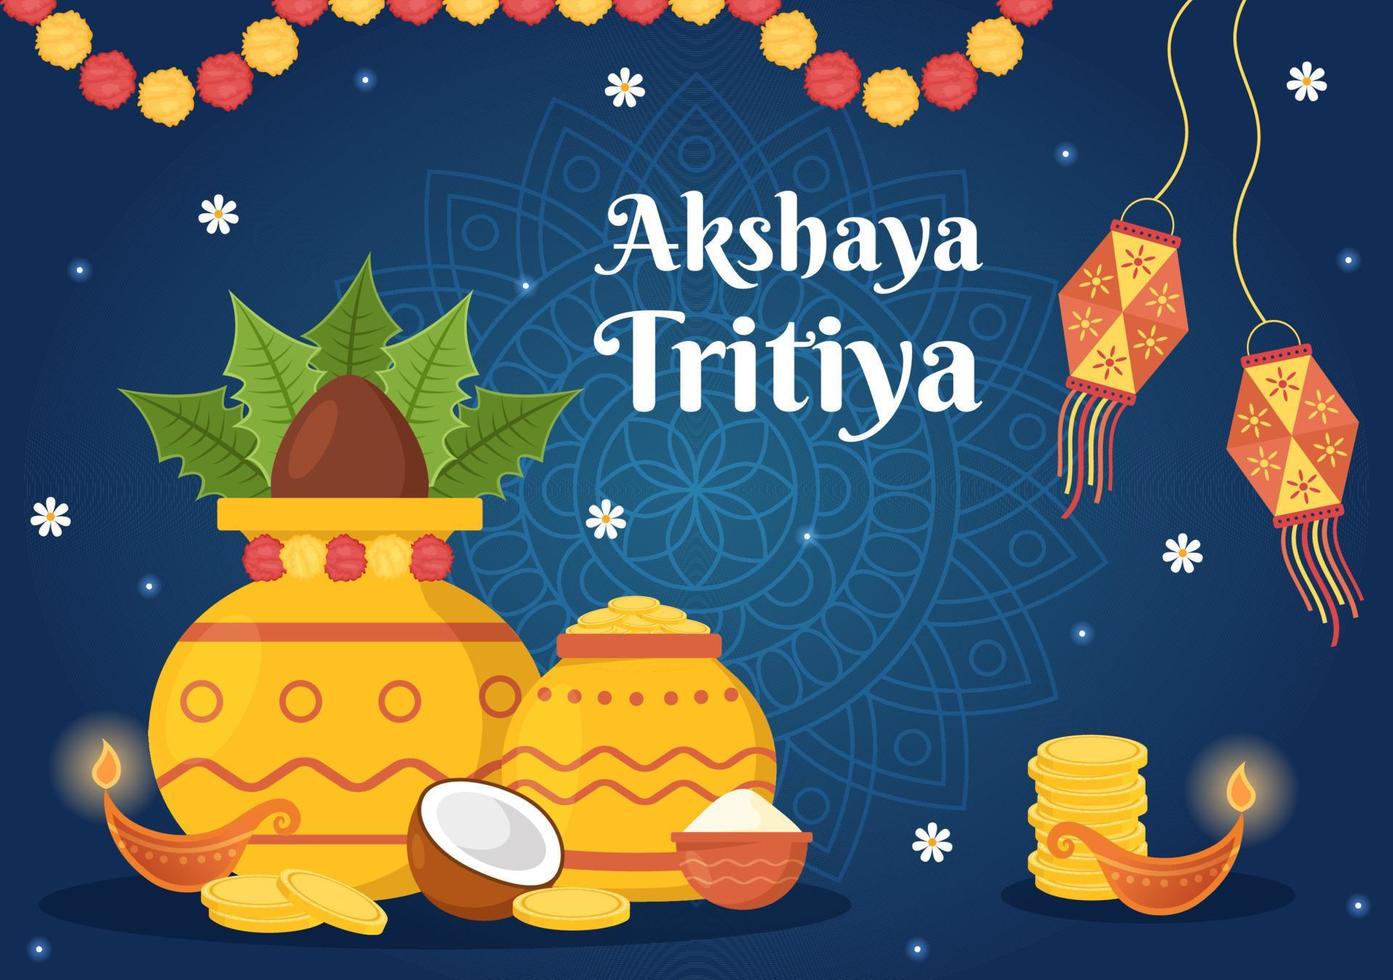 Akshaya Tritiya Festival Illustration with a Golden Kalash, Pot and Gold Coins for Dhanteras Celebration in Hand Drawn for Landing Page Templates vector